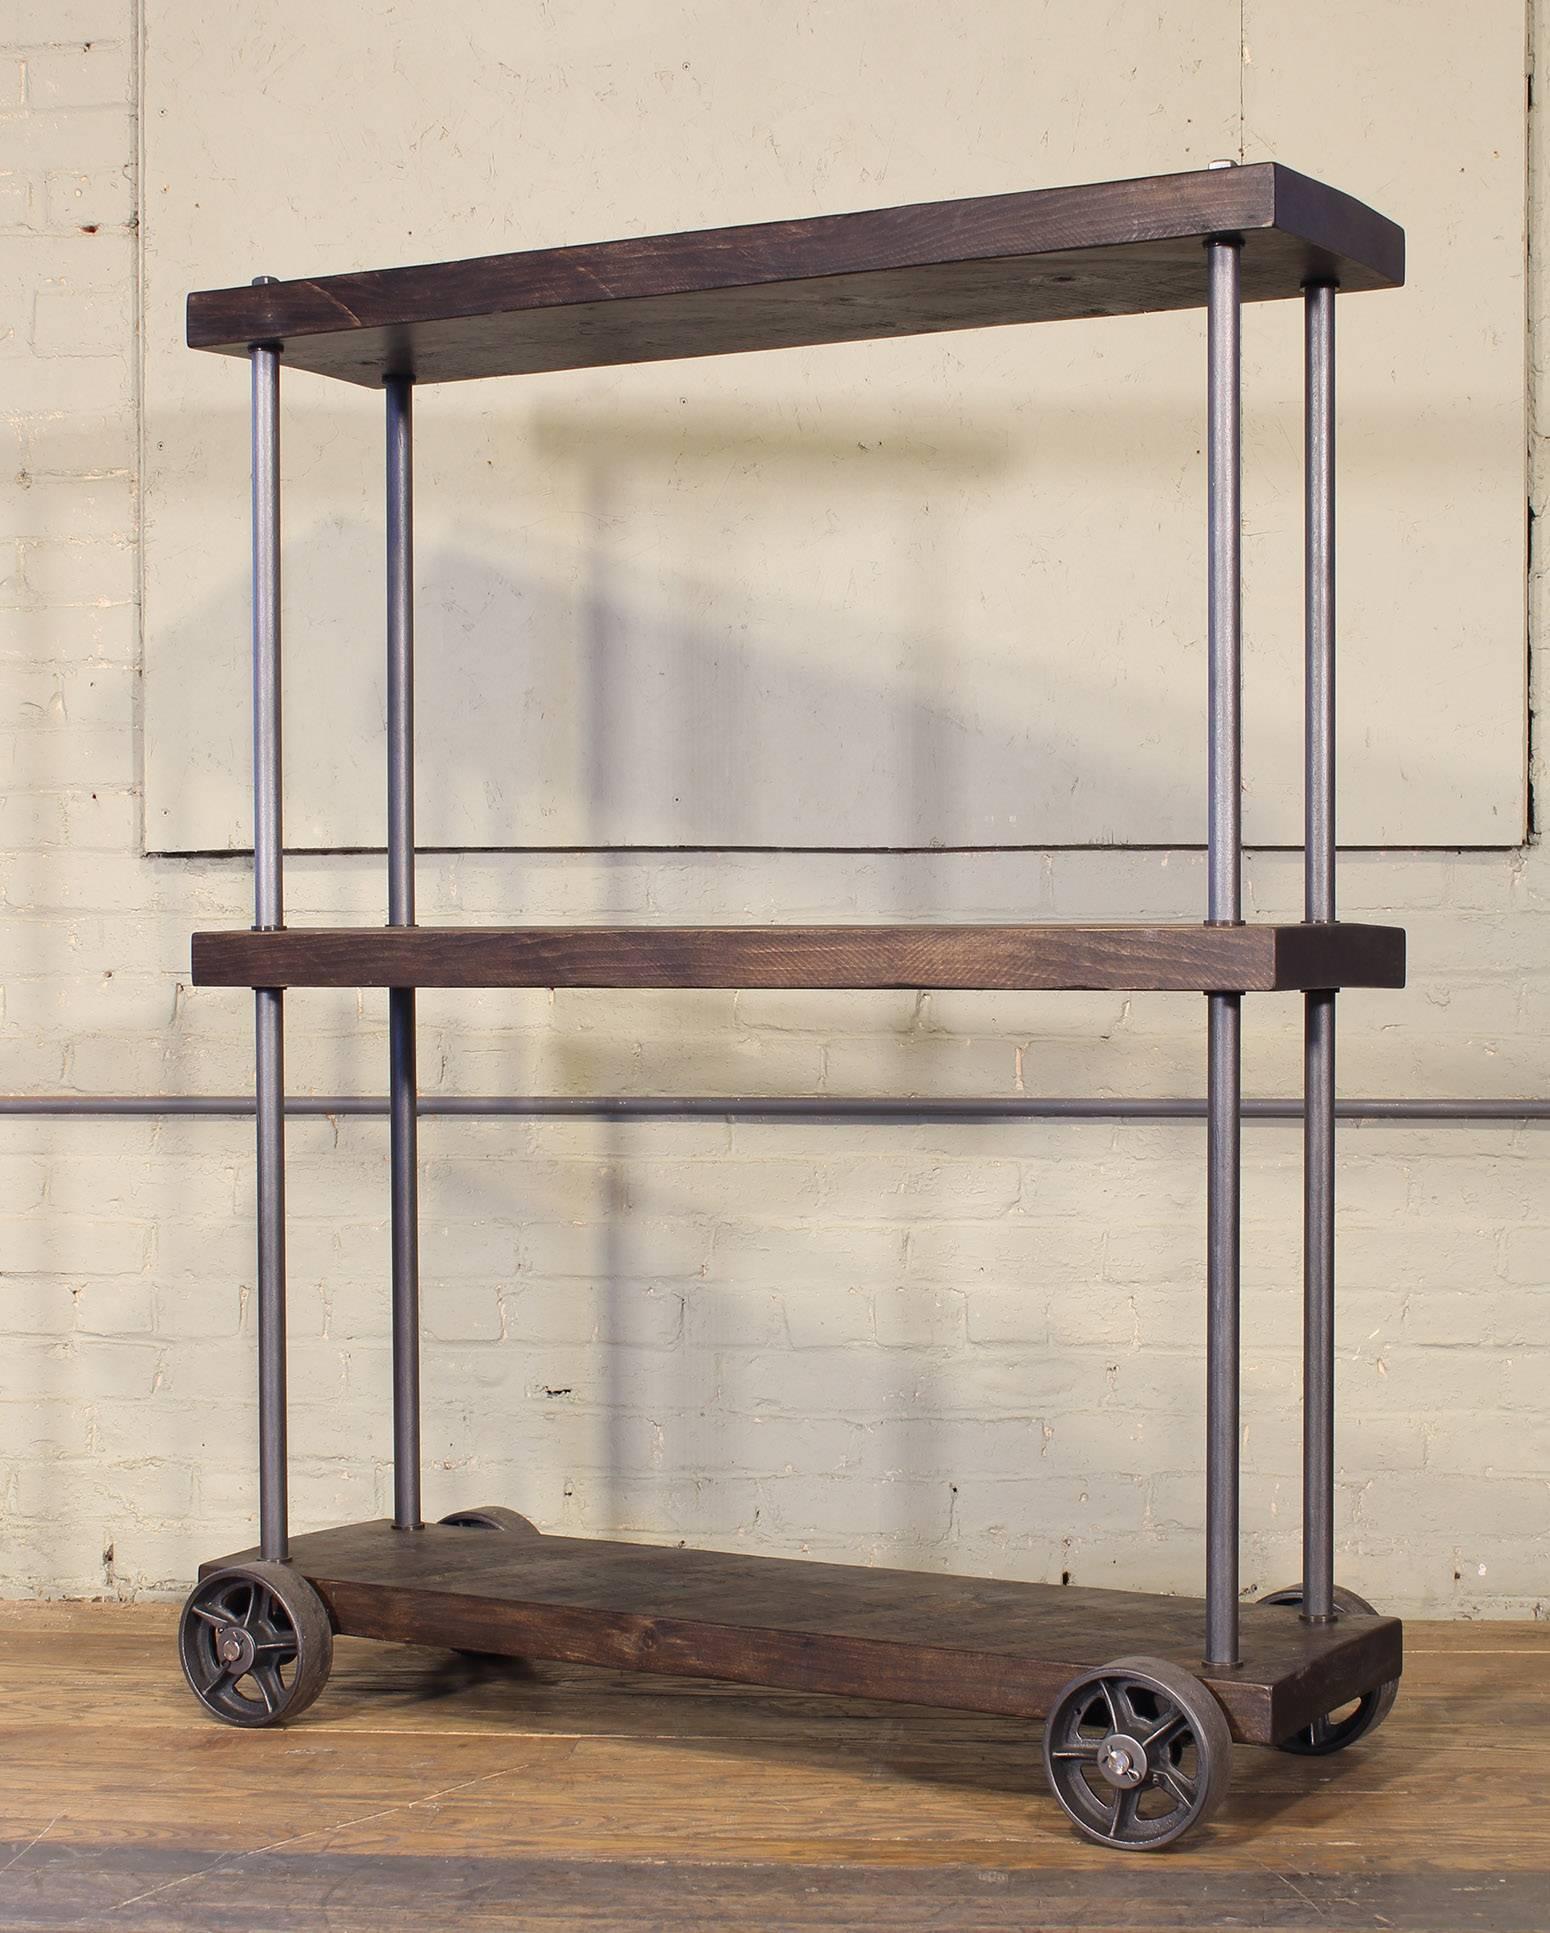 Rough sawn pine and cast iron industrial rolling shelving storage rack unit. Overall height of 53